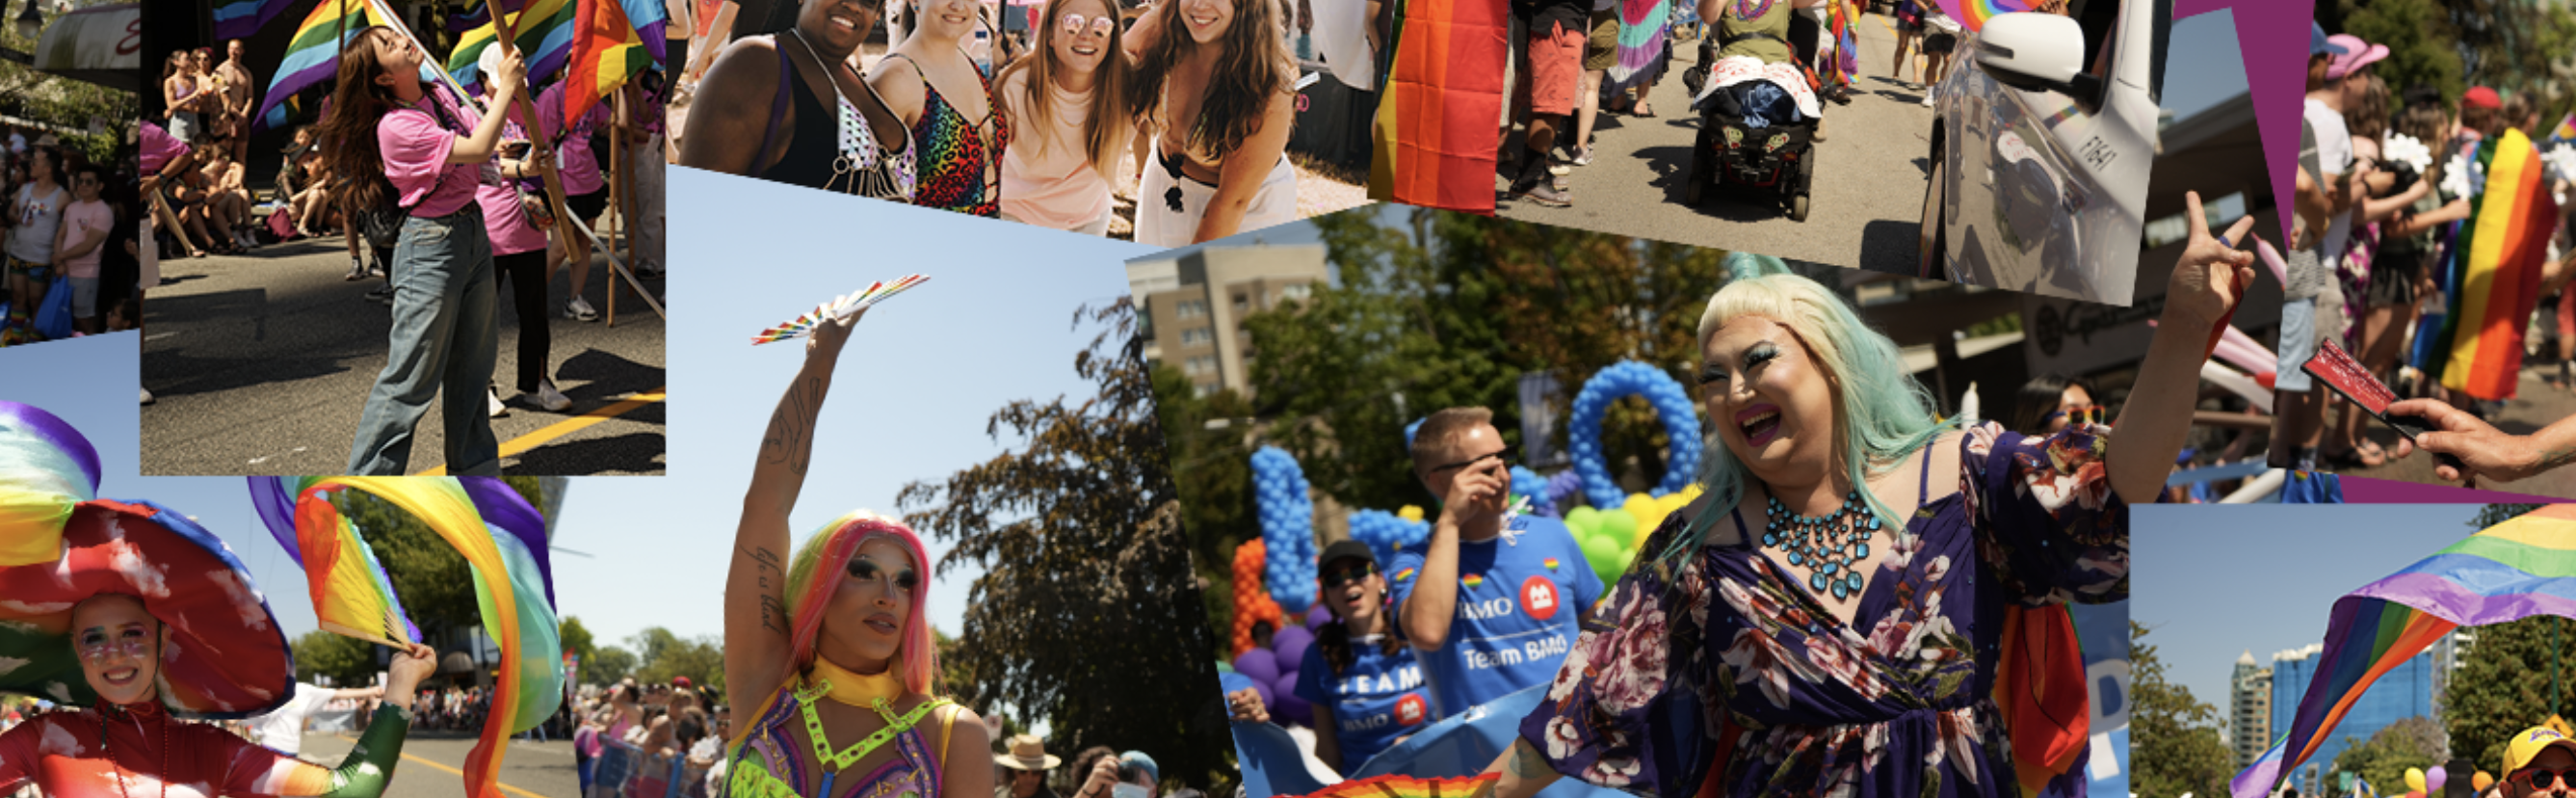 Photo shows a collage of photos taken at Vancouver Pride events. From left, a person wearing a mushroom hat and red, yellow, and green turtleneck waves rainbow ribbons, a person standing with long brown hair wearing a pink shirt and blue jeans waves a rainbow pride flag, a drag queen with pink and yellow hair raises a rainbow fan in the air, a group of four people pose for a photo, a smiling drag queen with blonde and blue hair holds up a peace sign with their fingers, rainbow flags and groups of people visible around collage of images. 